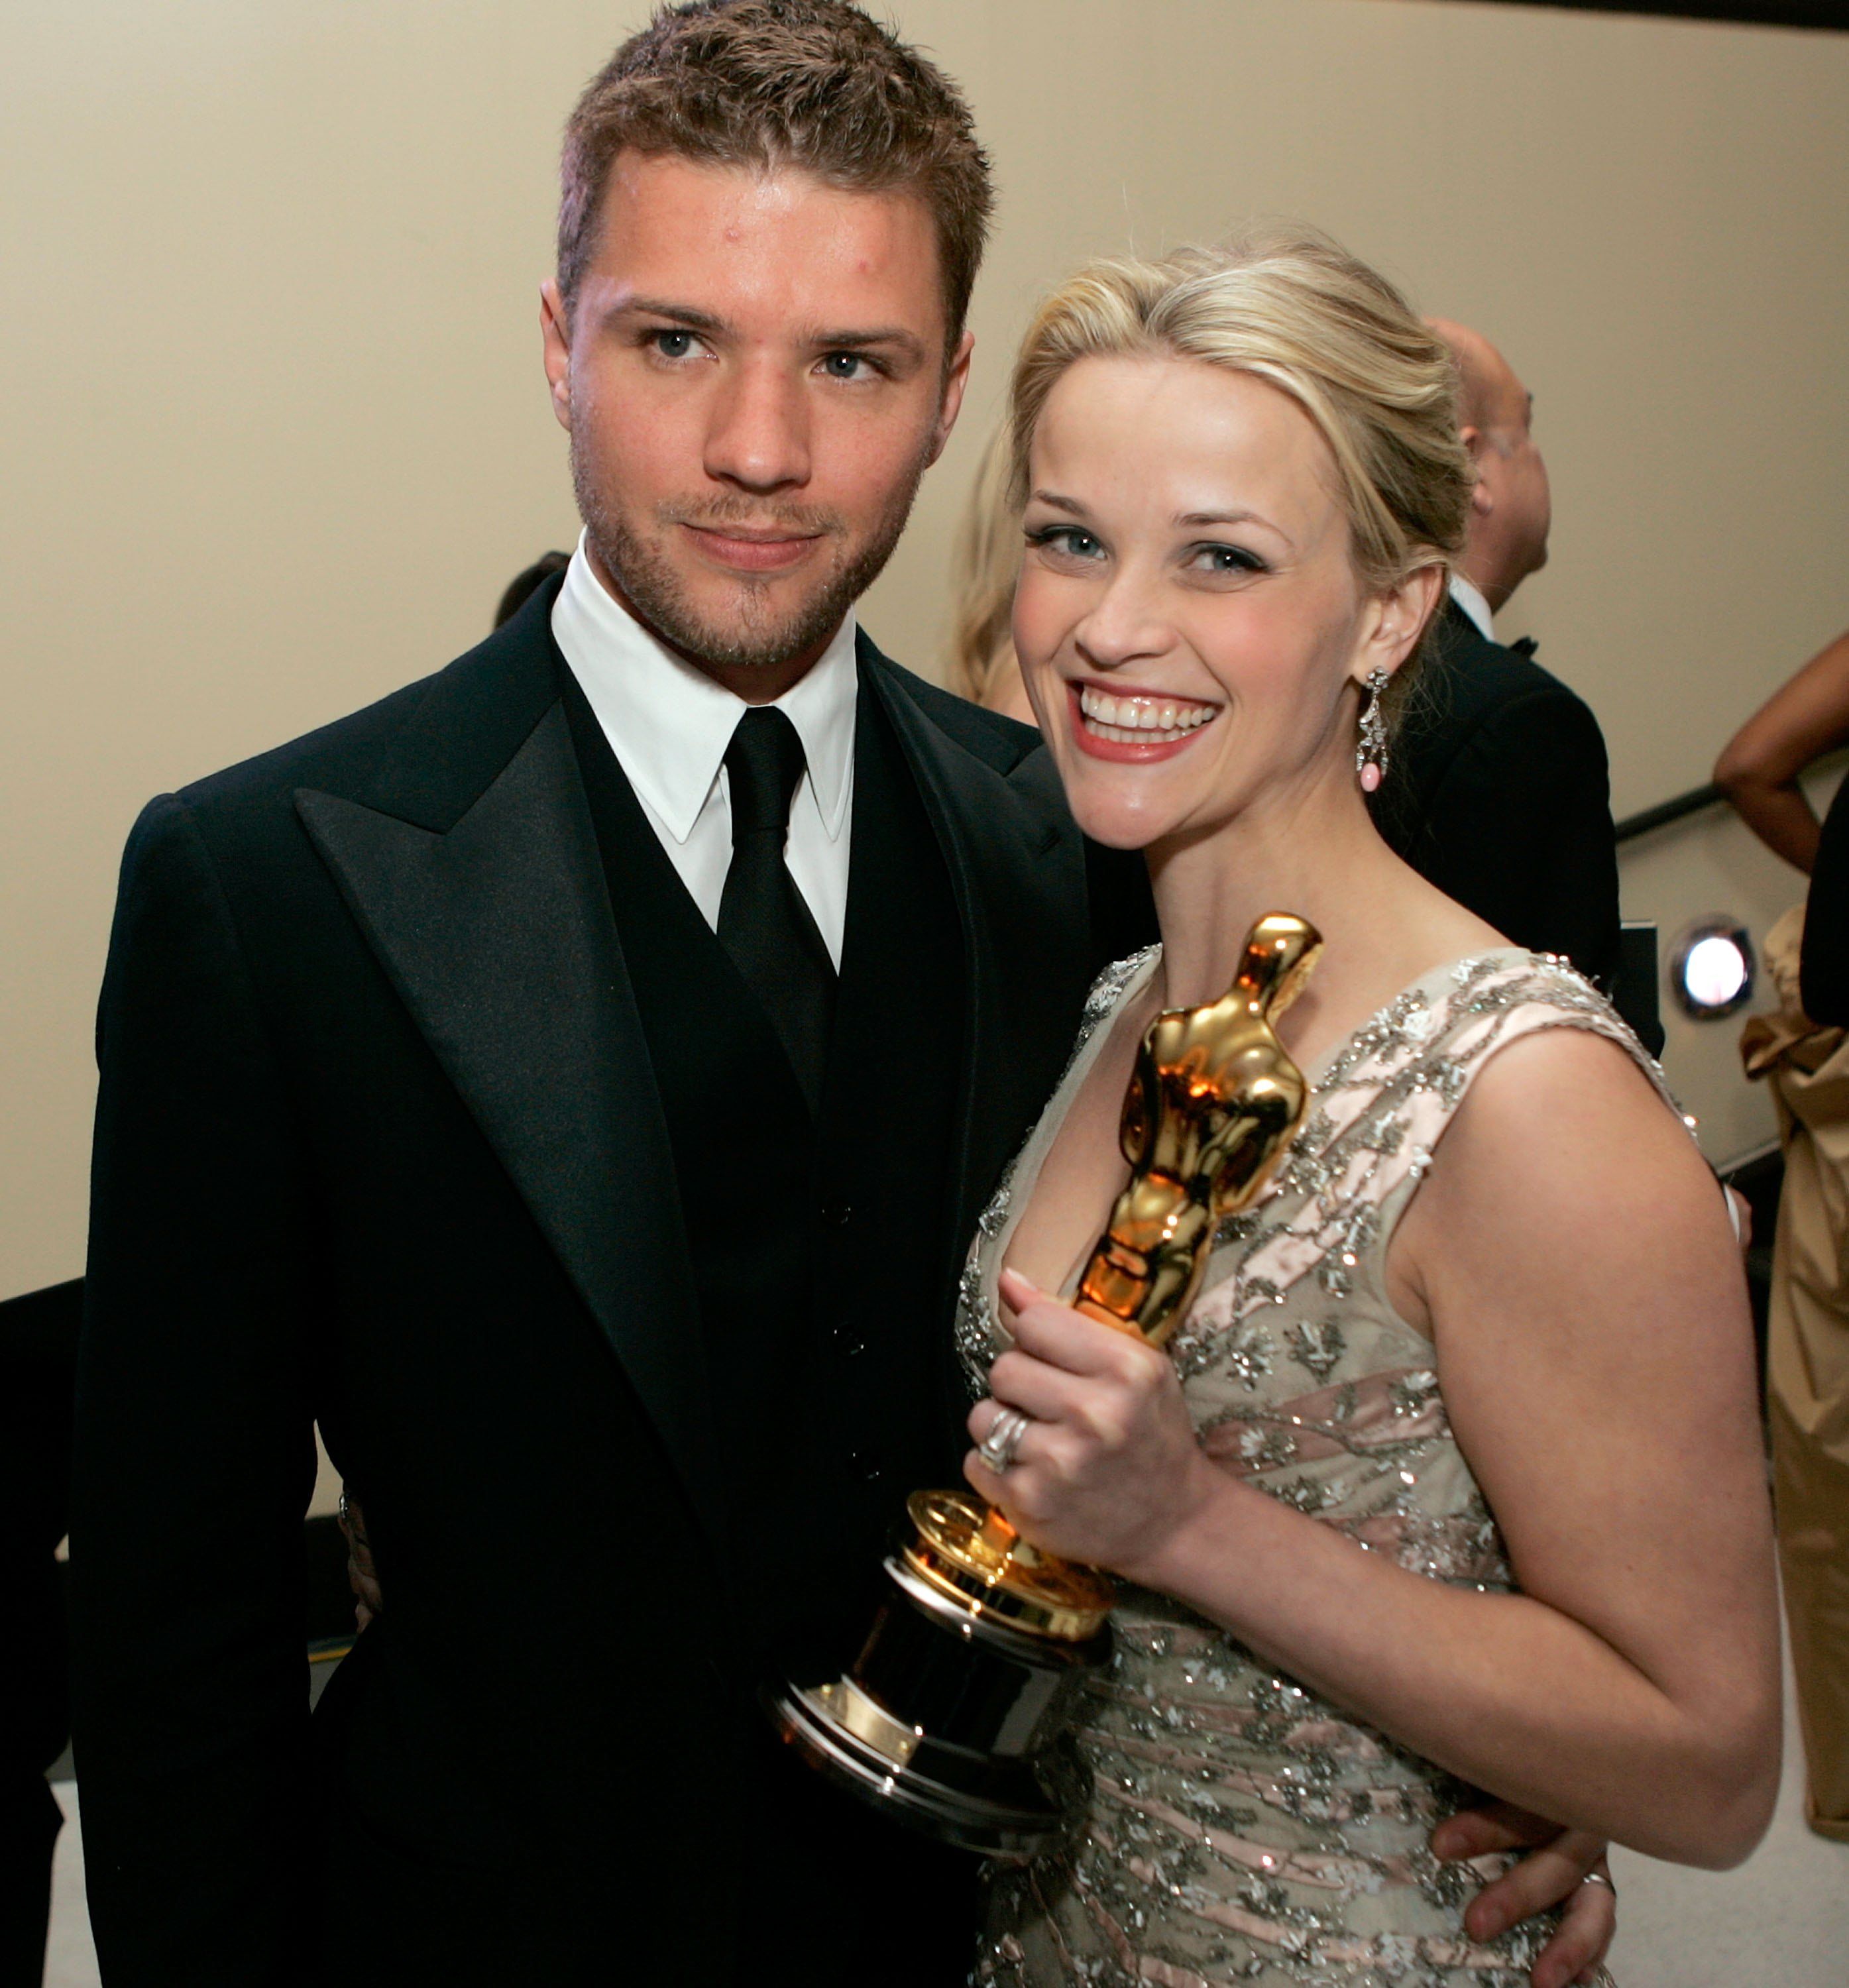 Reese Witherspoon poses with her Oscar and husband Ryan Phillippe as they attend the Governor's Ball. | Source: Getty Images 